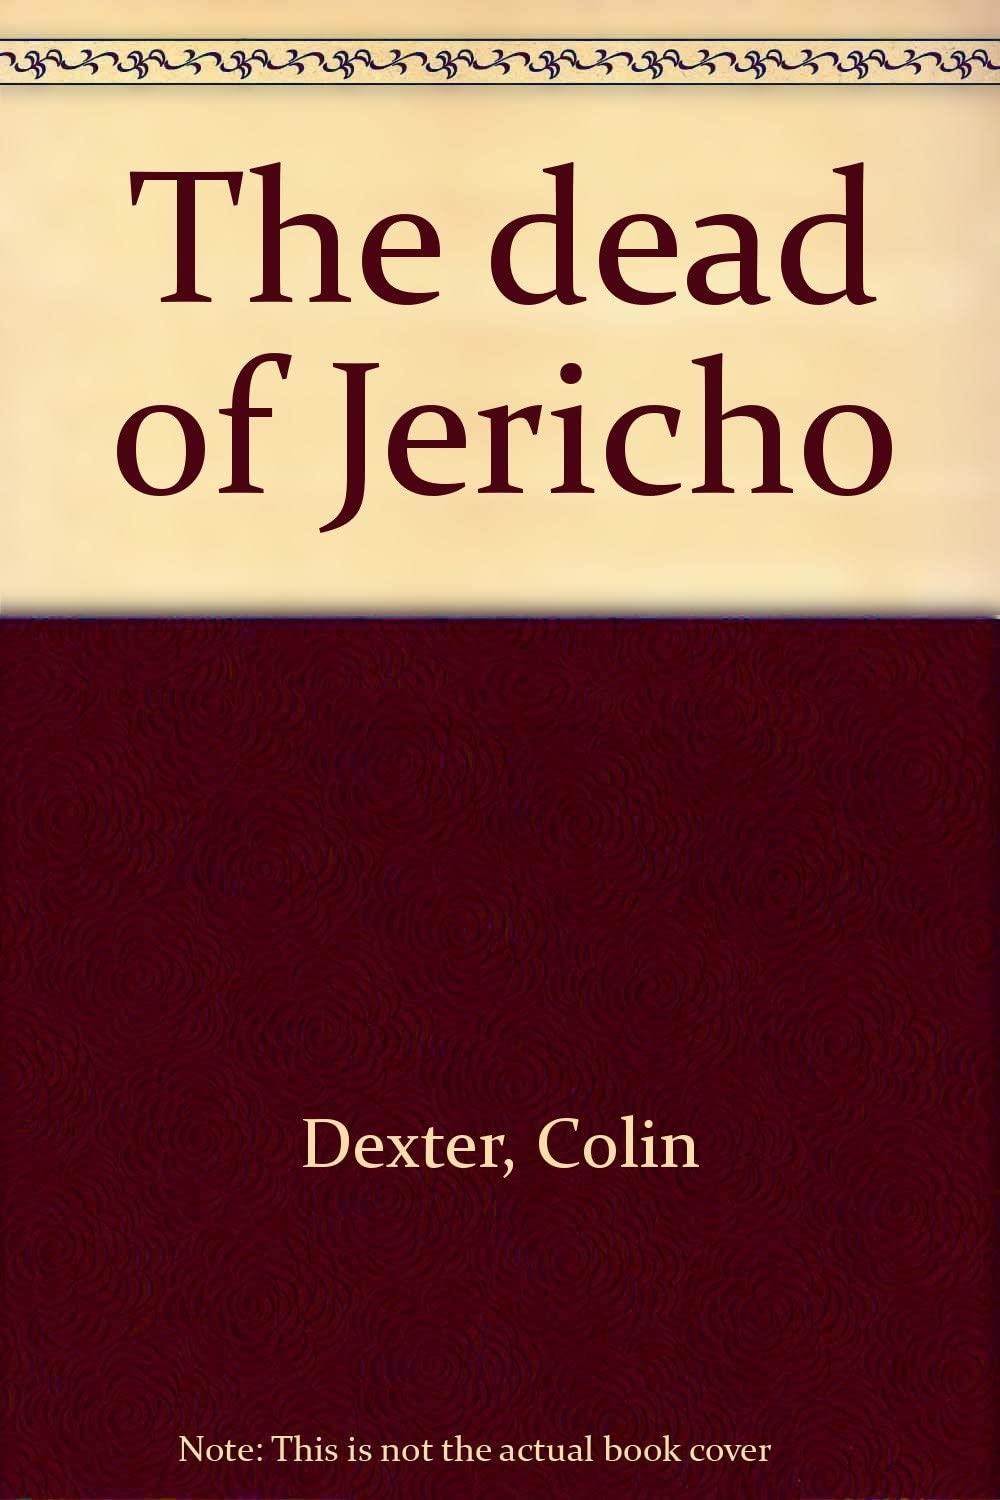 The dead of Jericho